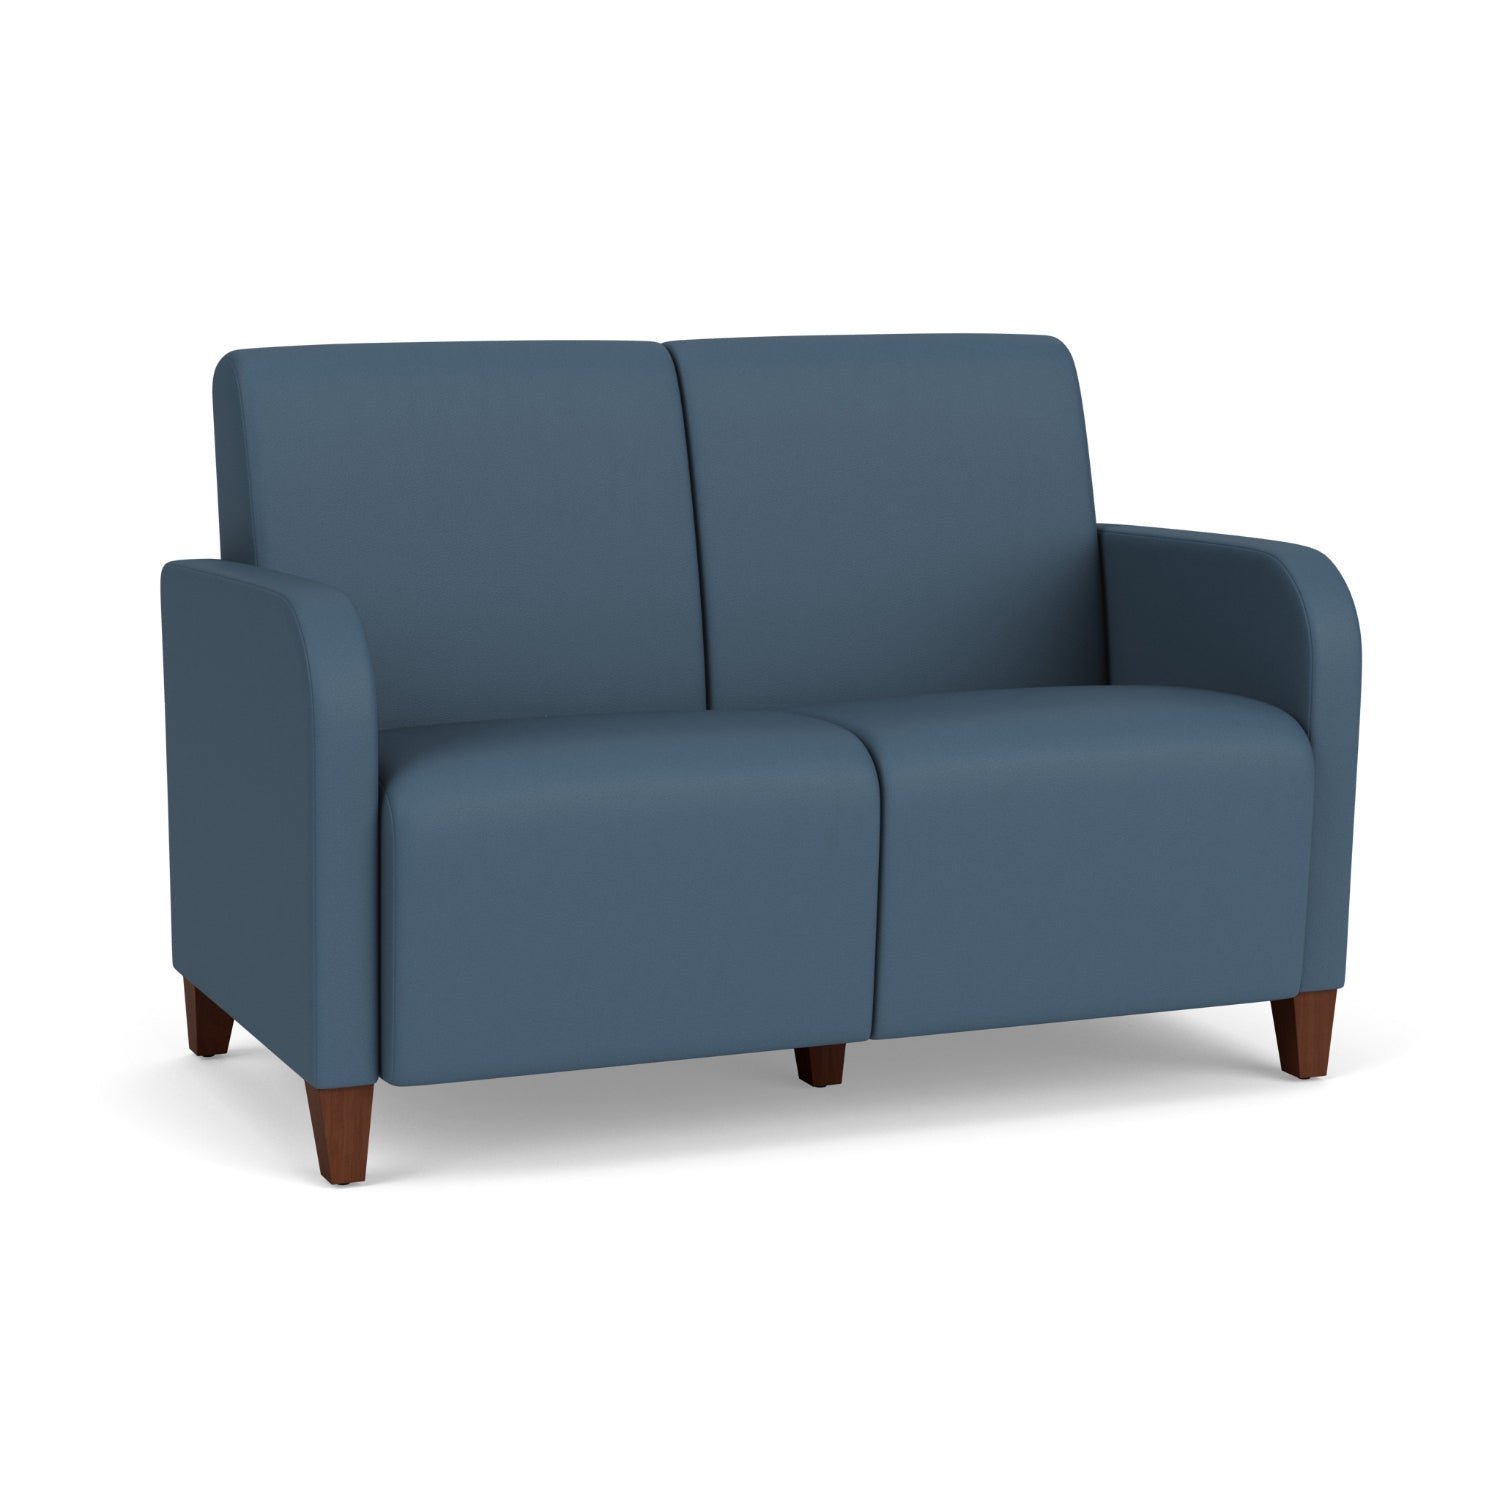 Siena Collection Reception Seating, 2-Seat Sofa, Standard Vinyl Upholstery, FREE SHIPPING